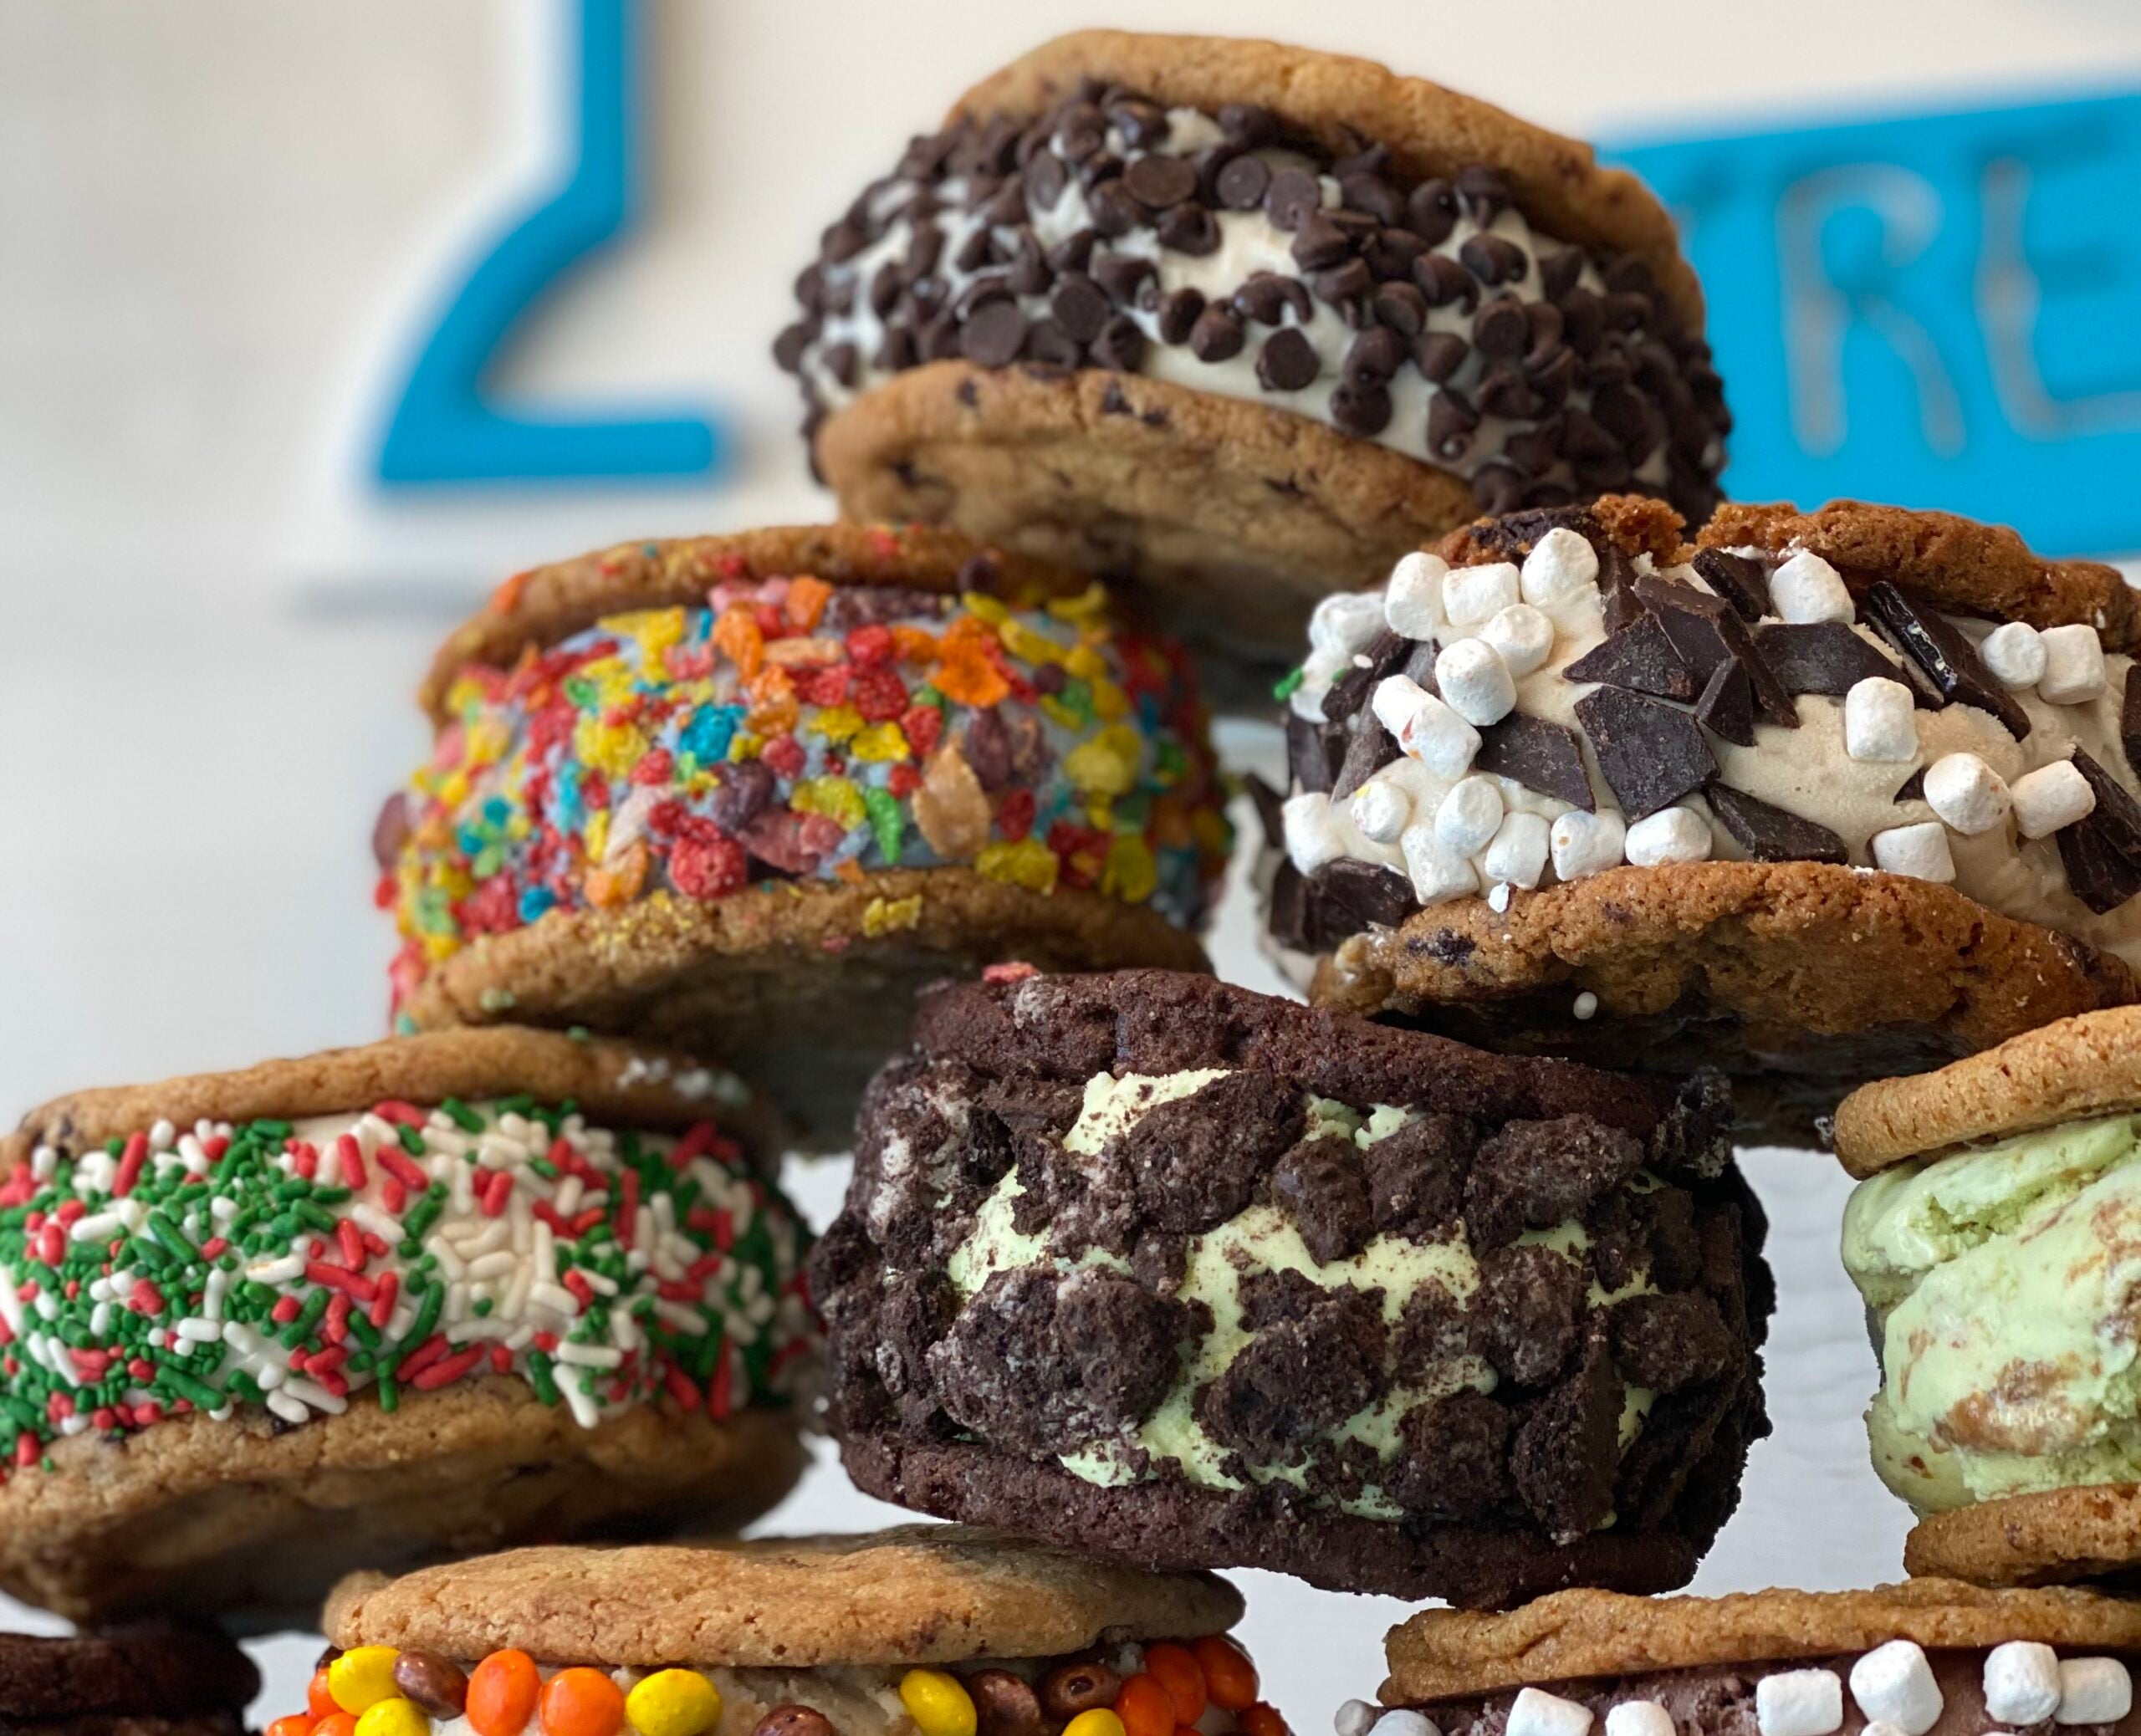 Brooklyn scoop shop partners with popular bakery brand to celebrate  National Ice Cream Sandwich Day with free treats